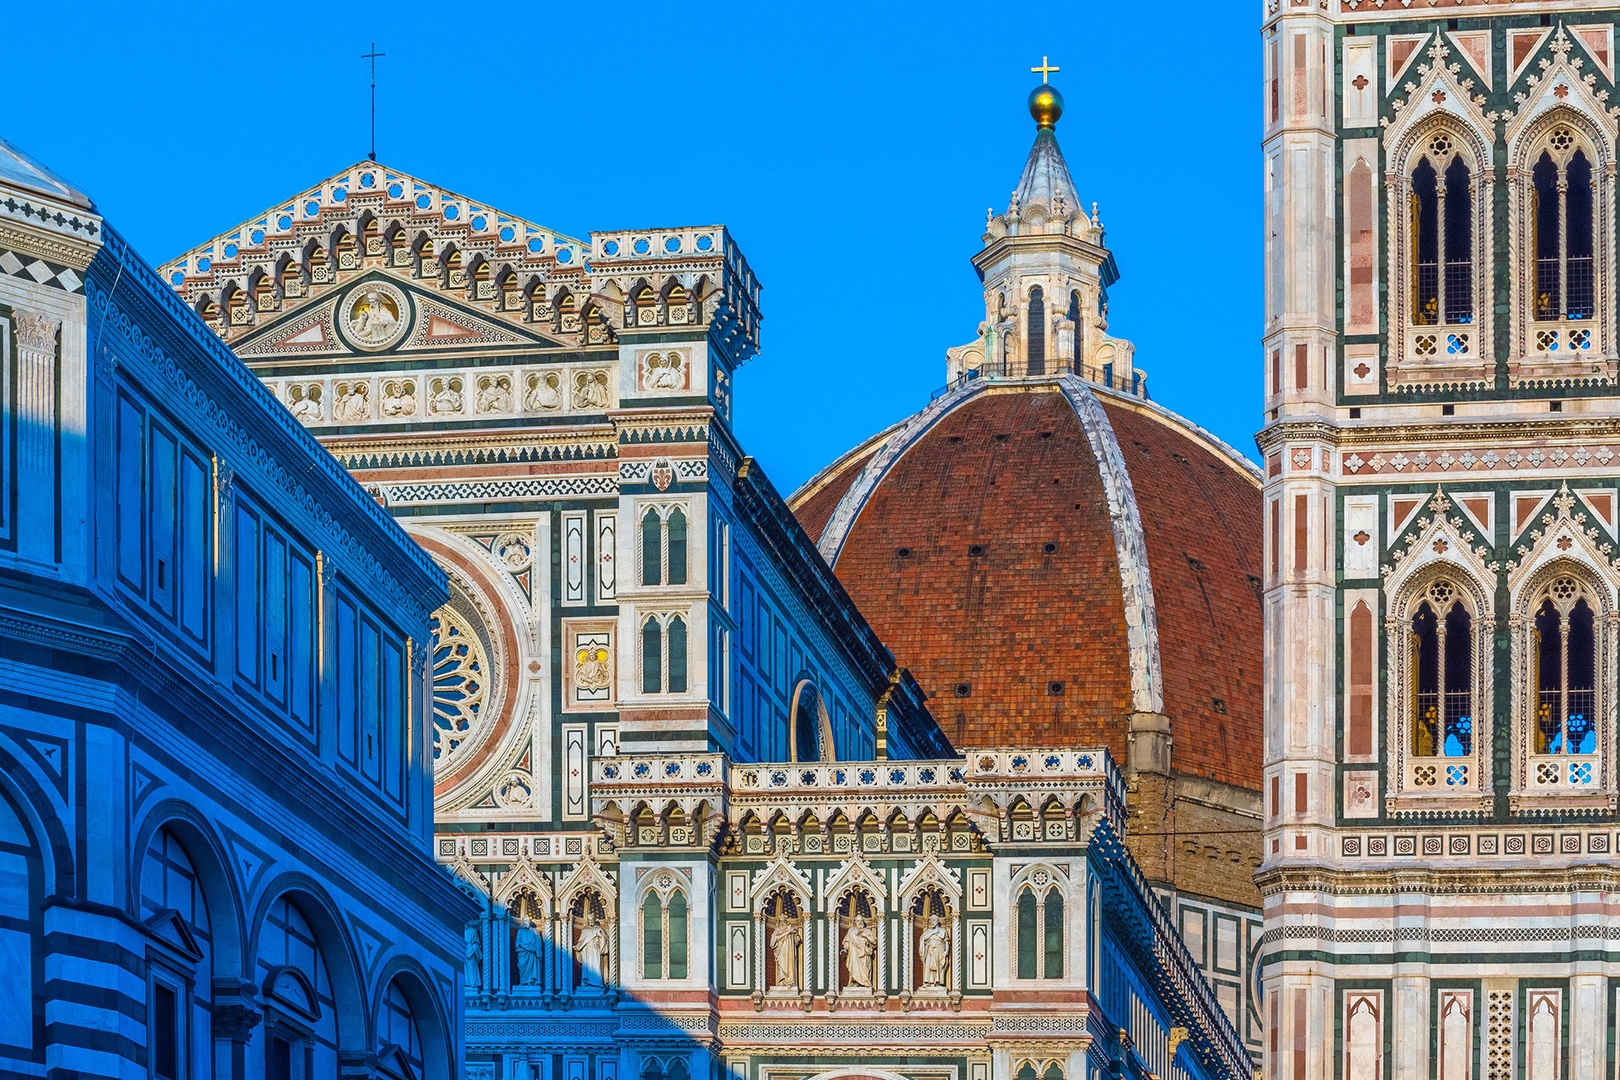 Brunelleschi's Dome crowns this world-famous architecture of the Cathedral, bell tower and baptistry.